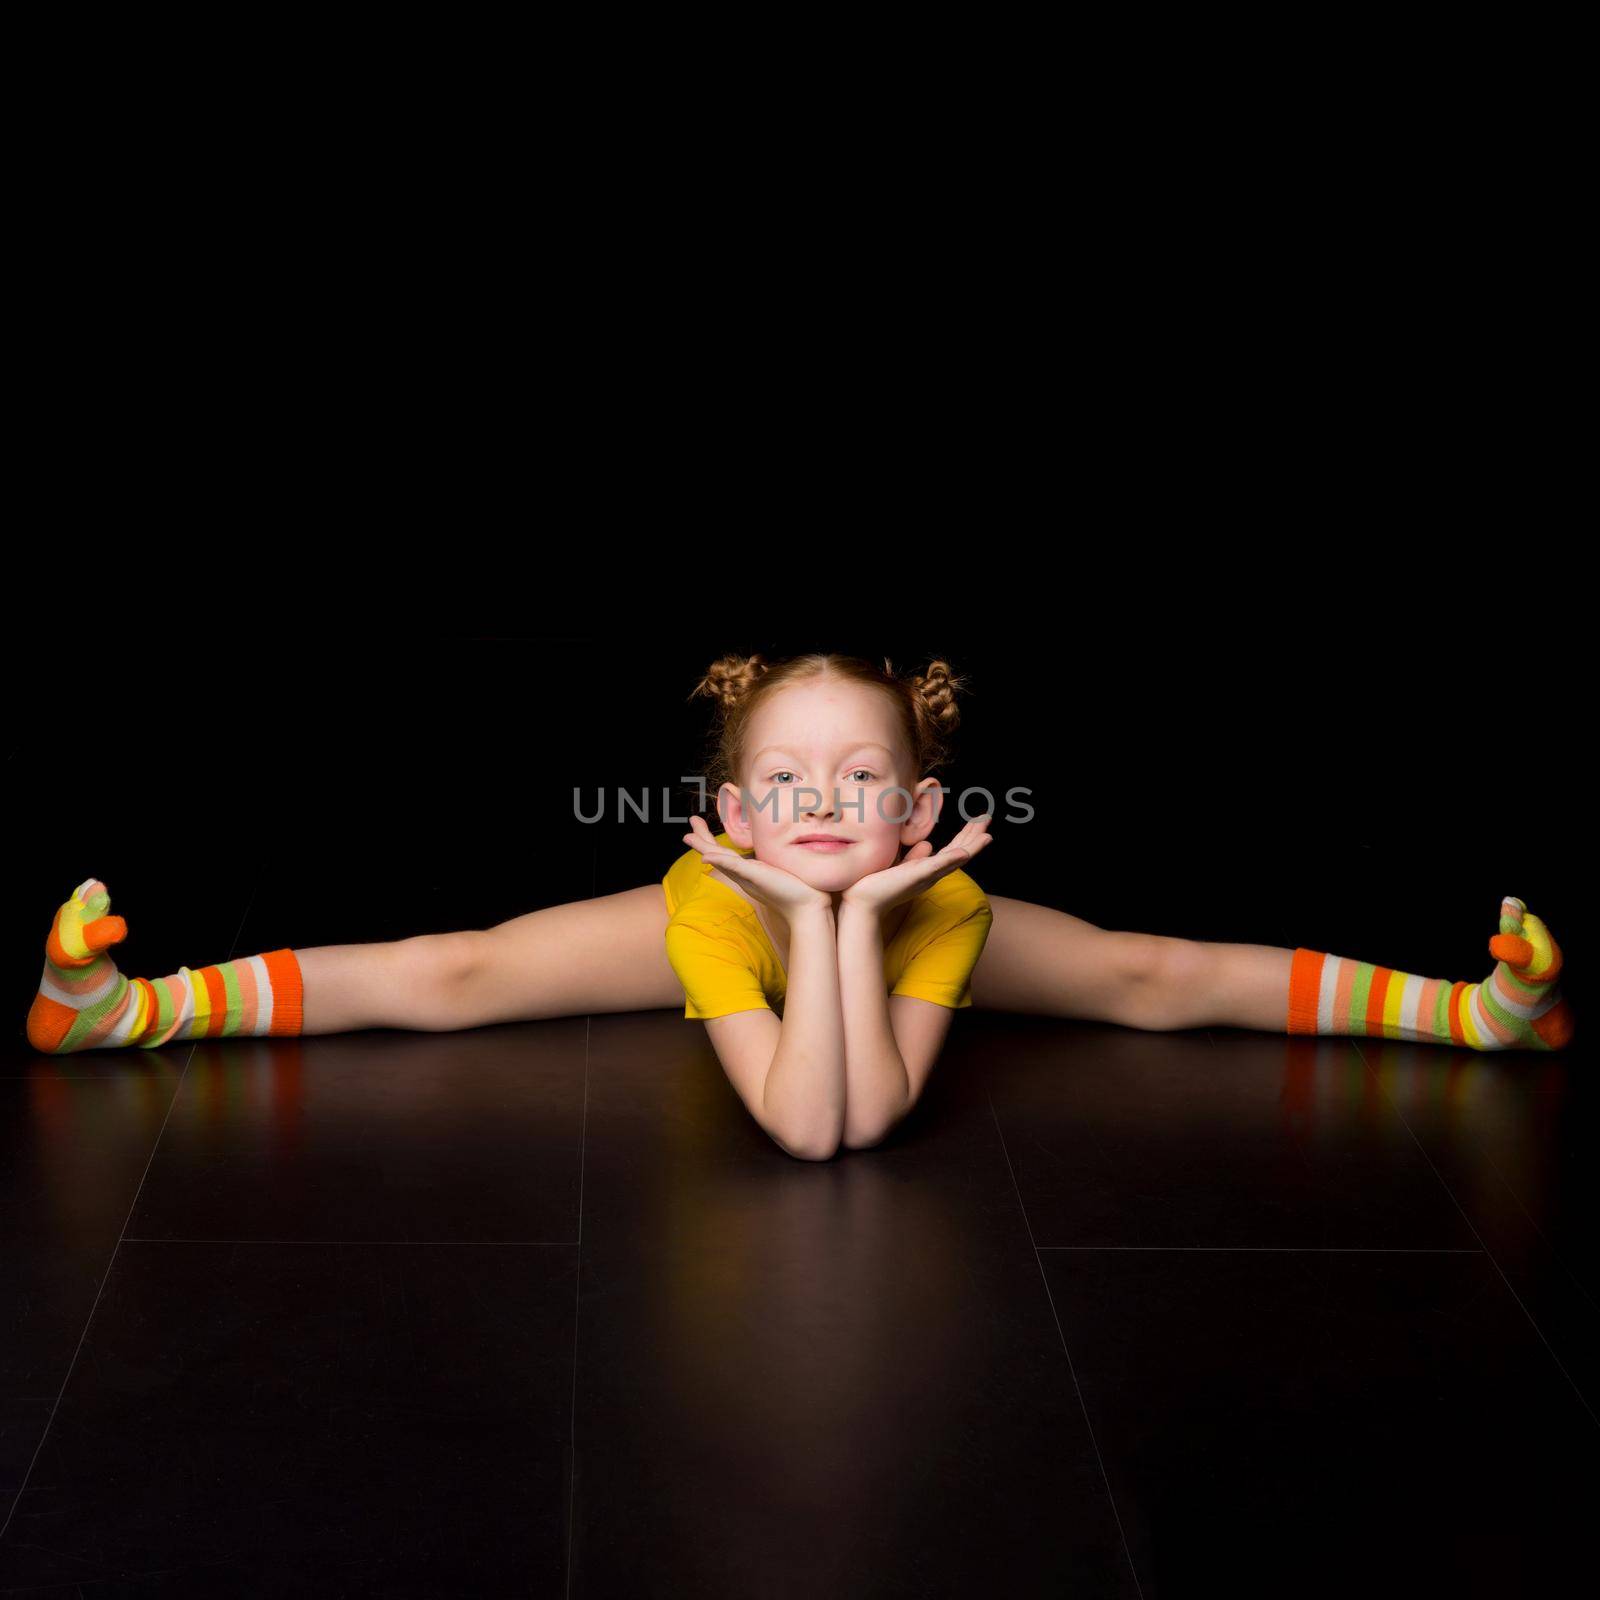 Cute happy young girl gymnast doing cross splits. Happy adorable kid wearing yellow leotard performing rhythmic gymnastic exercise and smiling at camera against black background